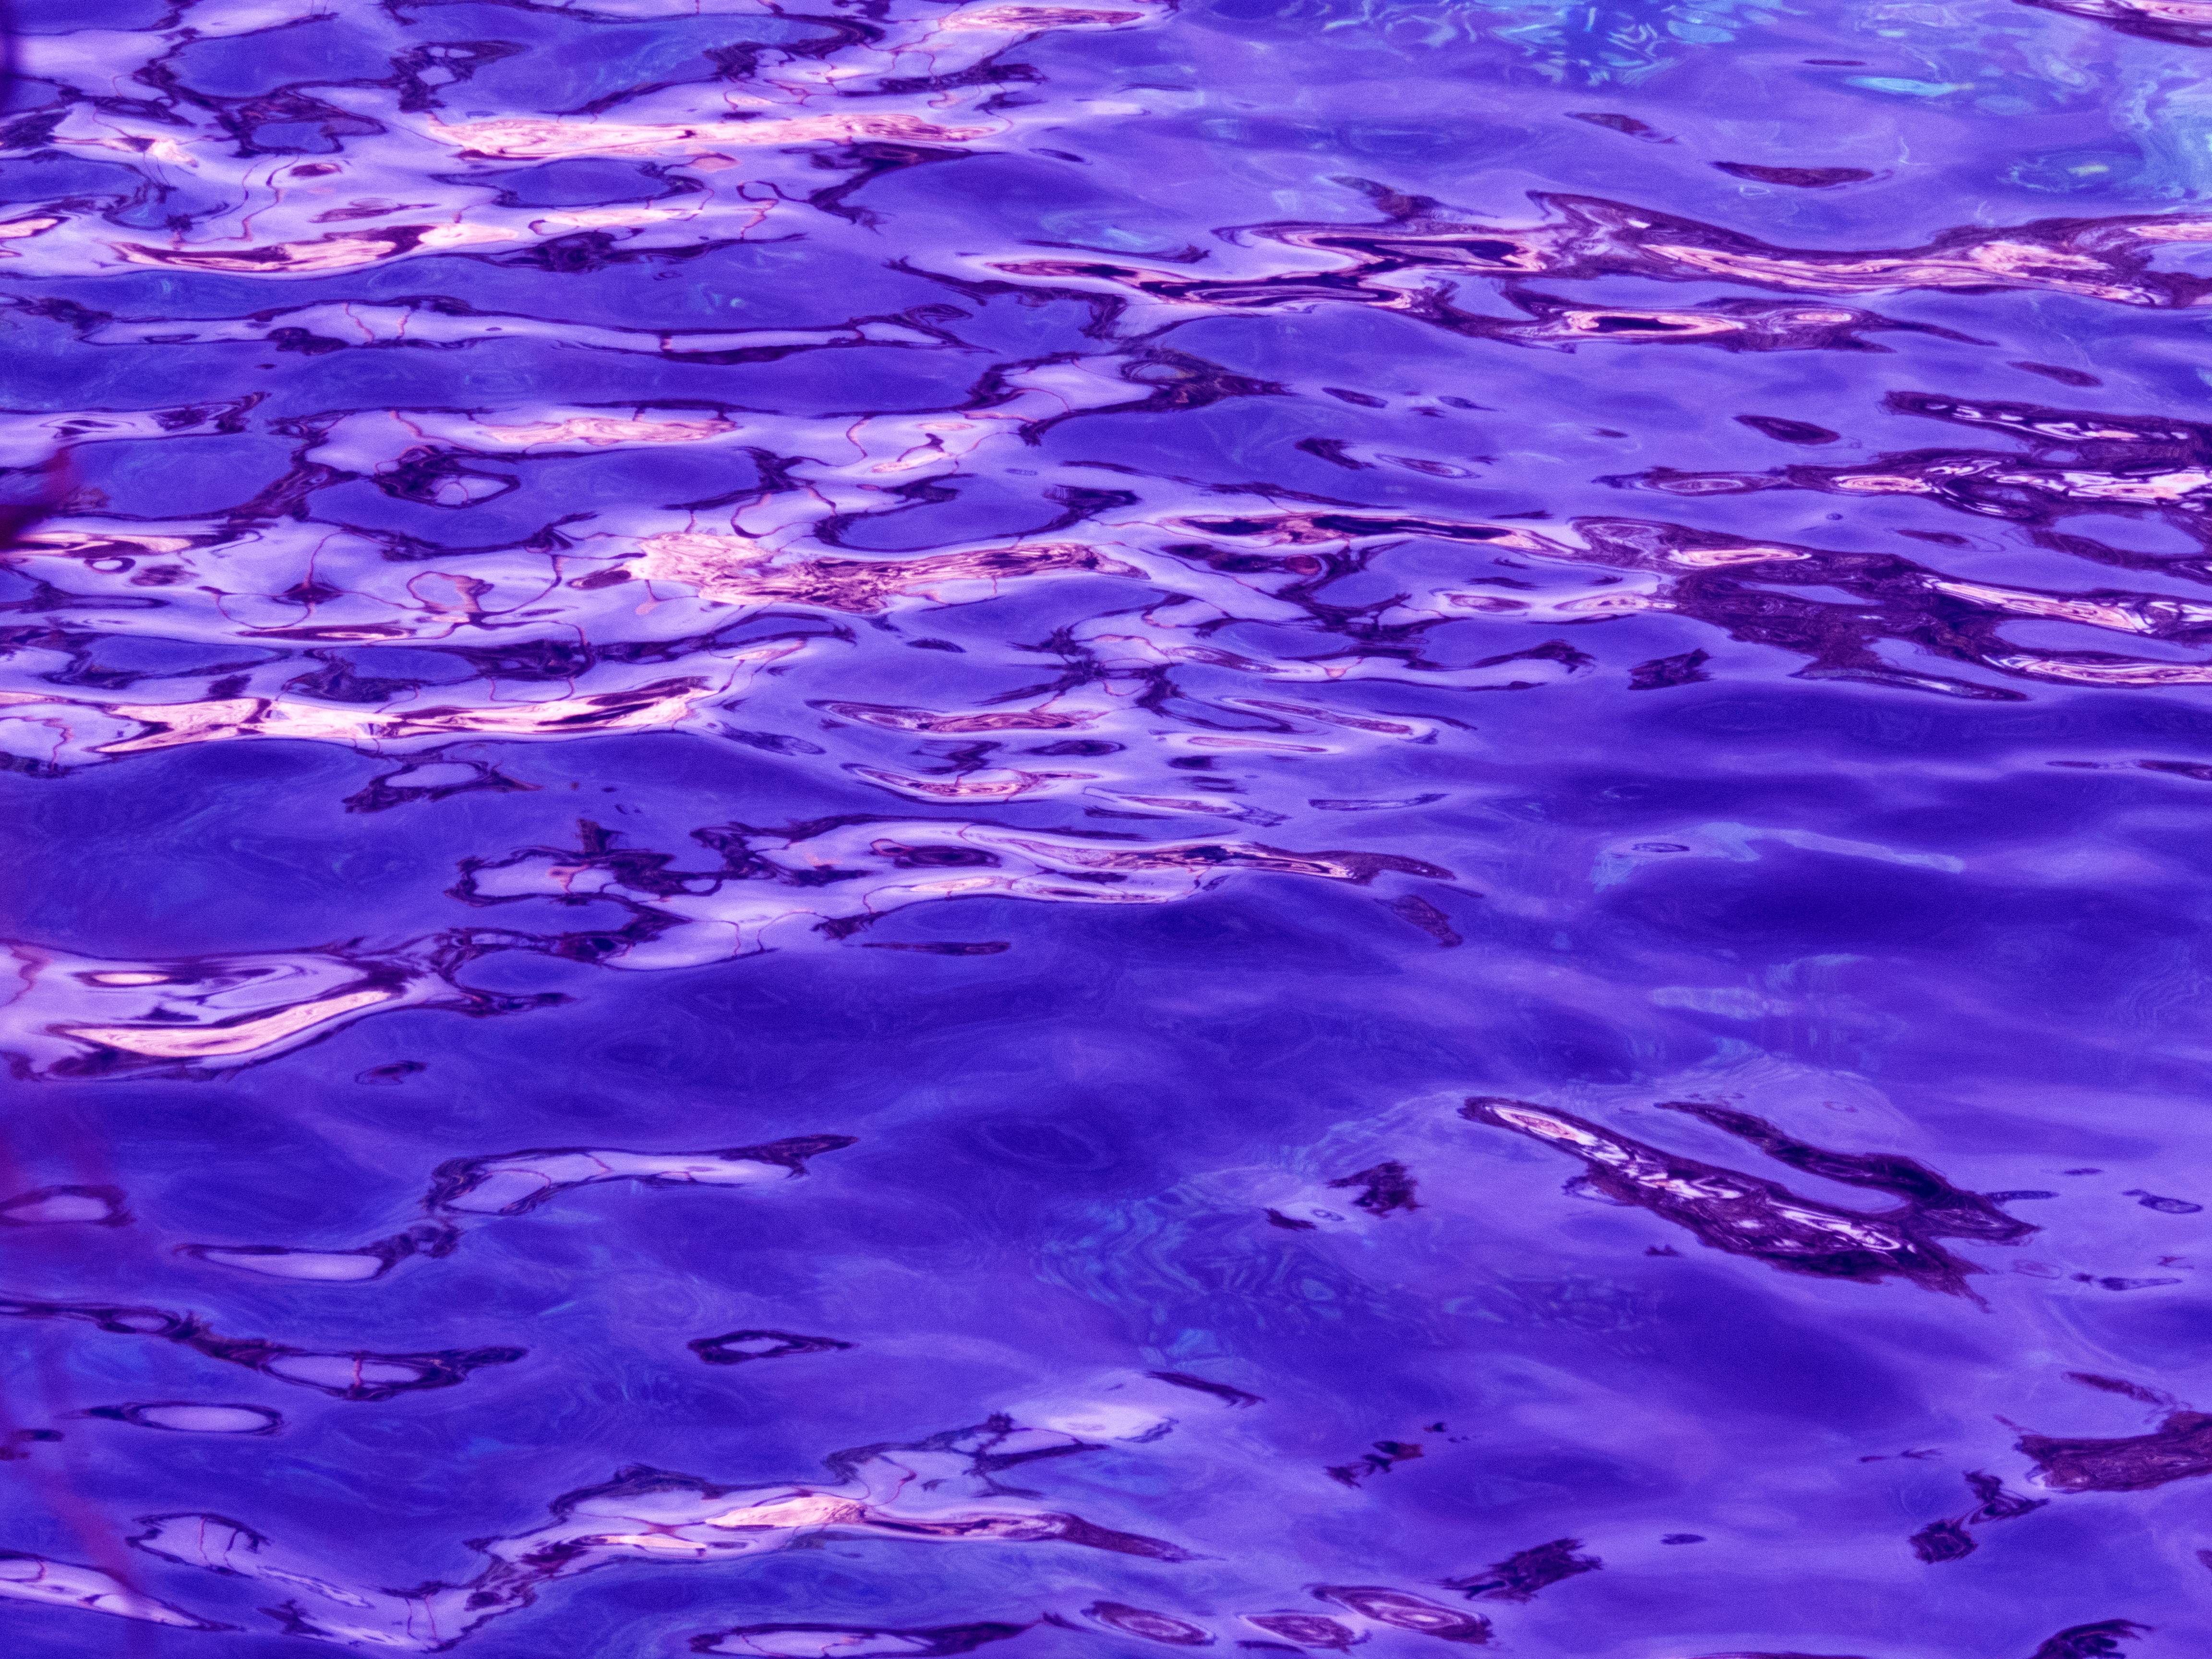 Aesthetic Water Background